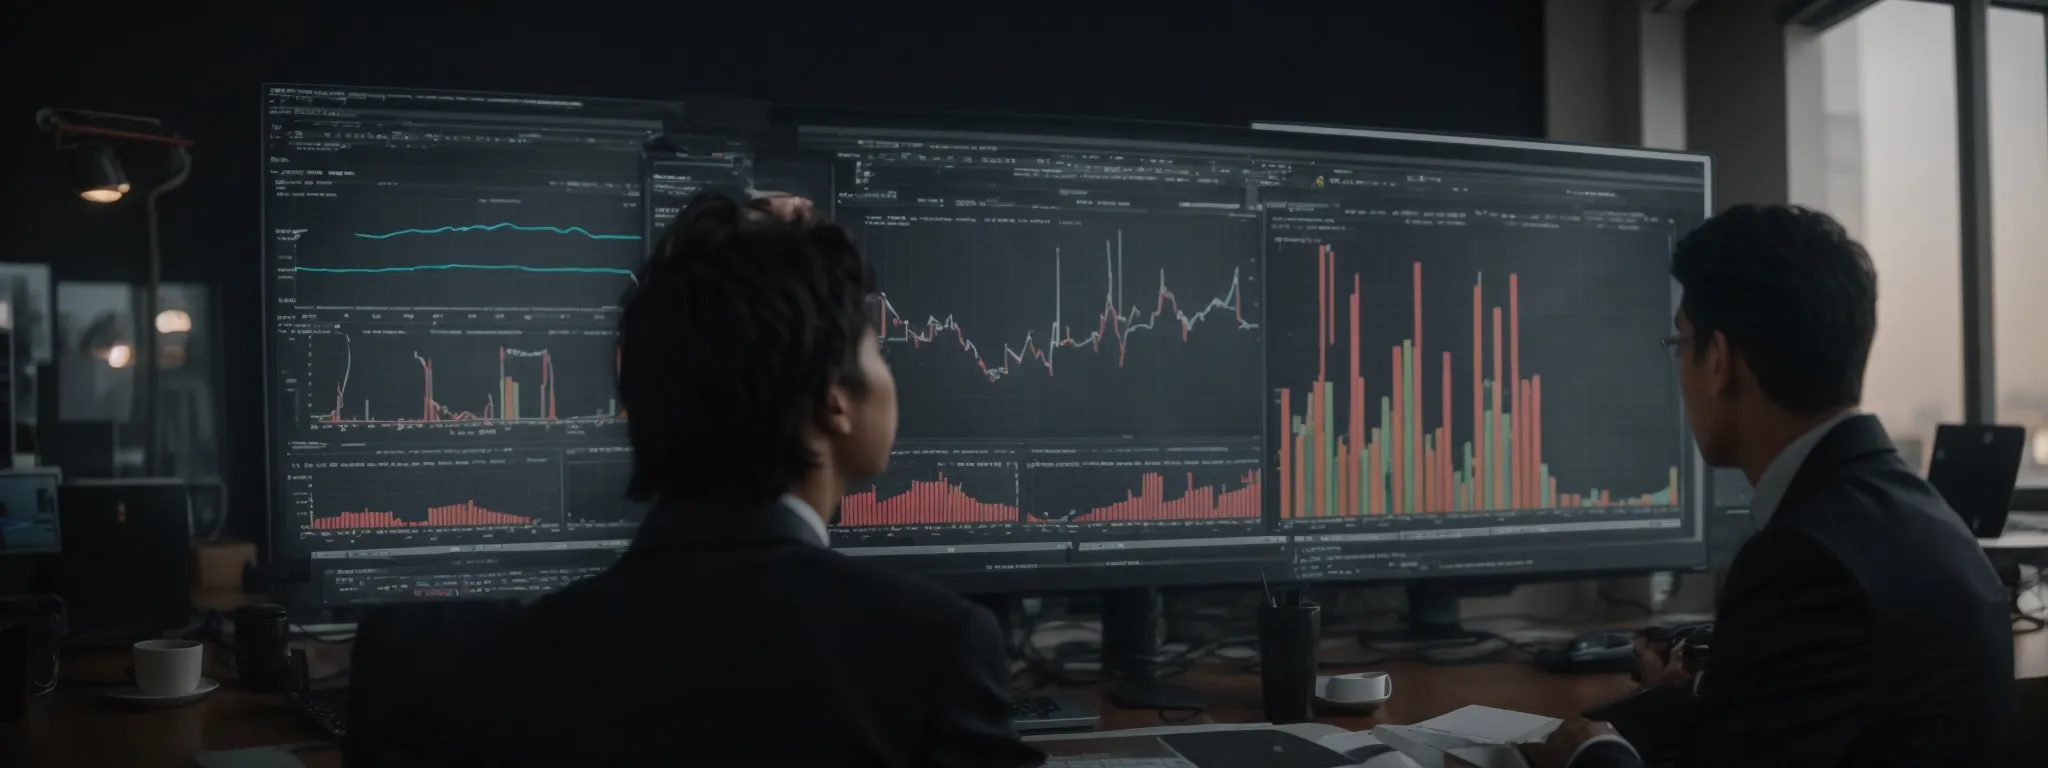 a digital marketing team analyzes charts and graphs on a large monitor showcasing website analytics and performance metrics.